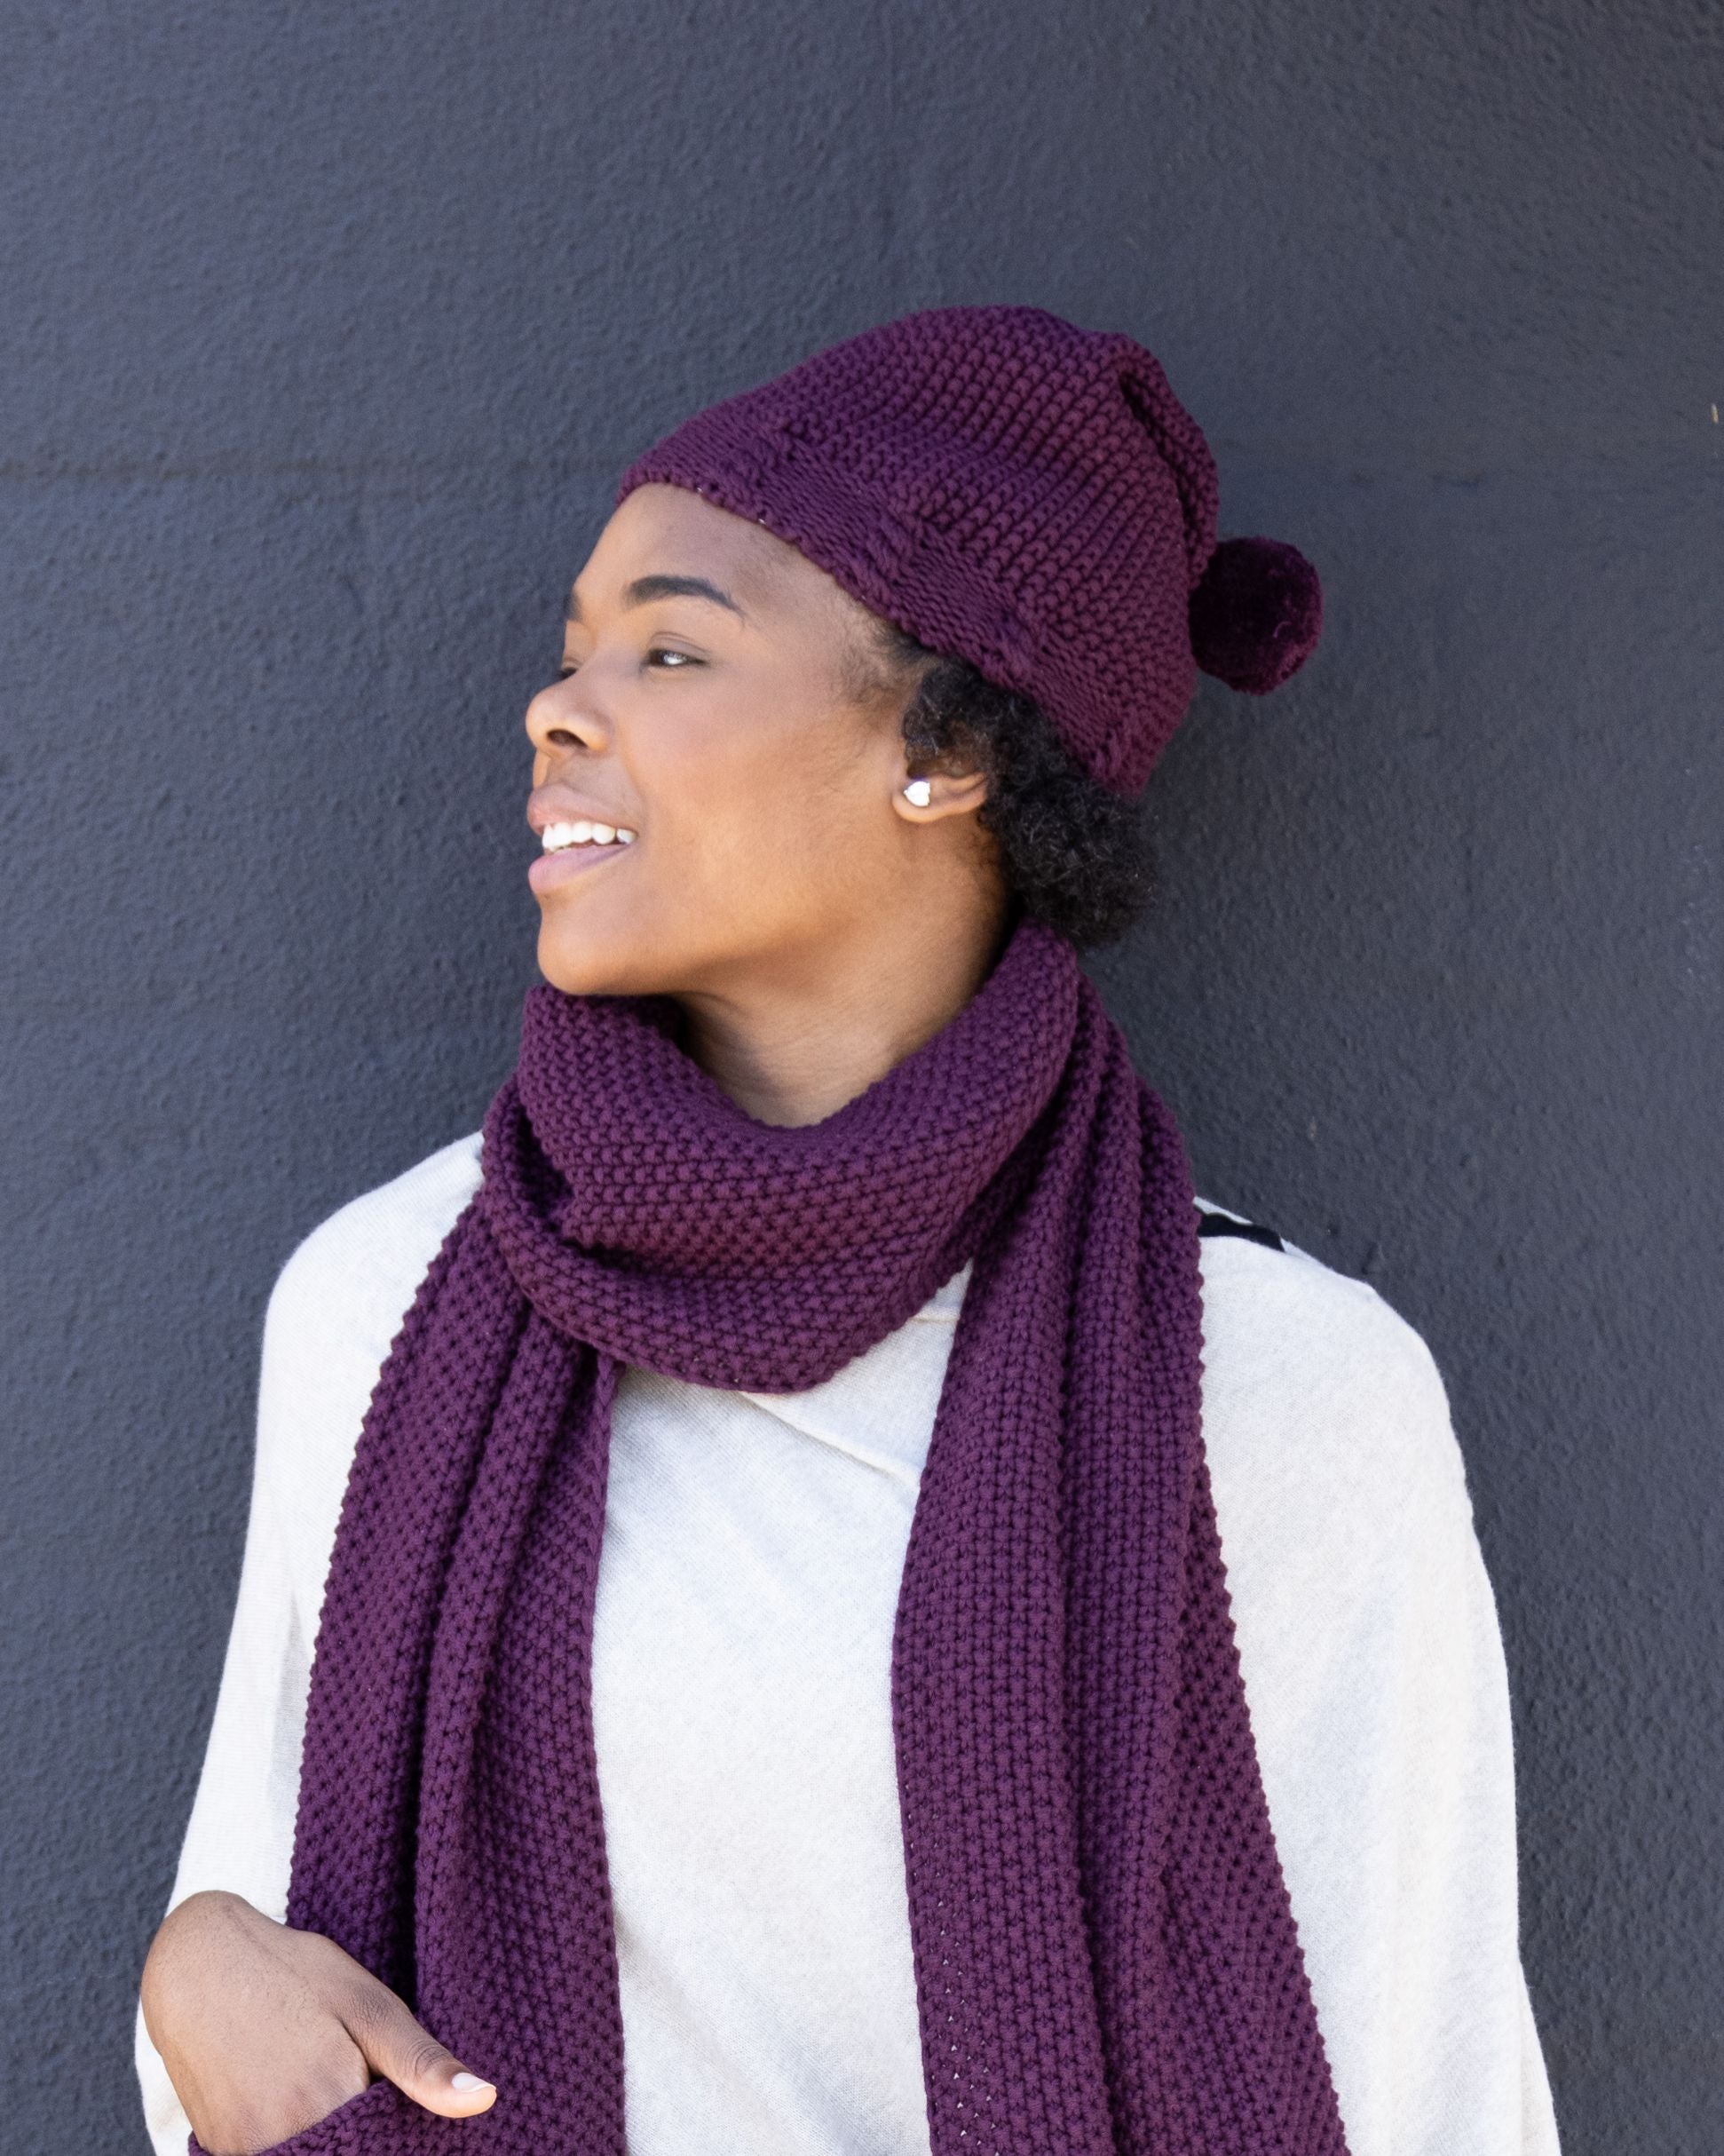 Woman wearing Organic Cotton Cozy Knit Pom Pom Hat in Mulberry which is a purple hat